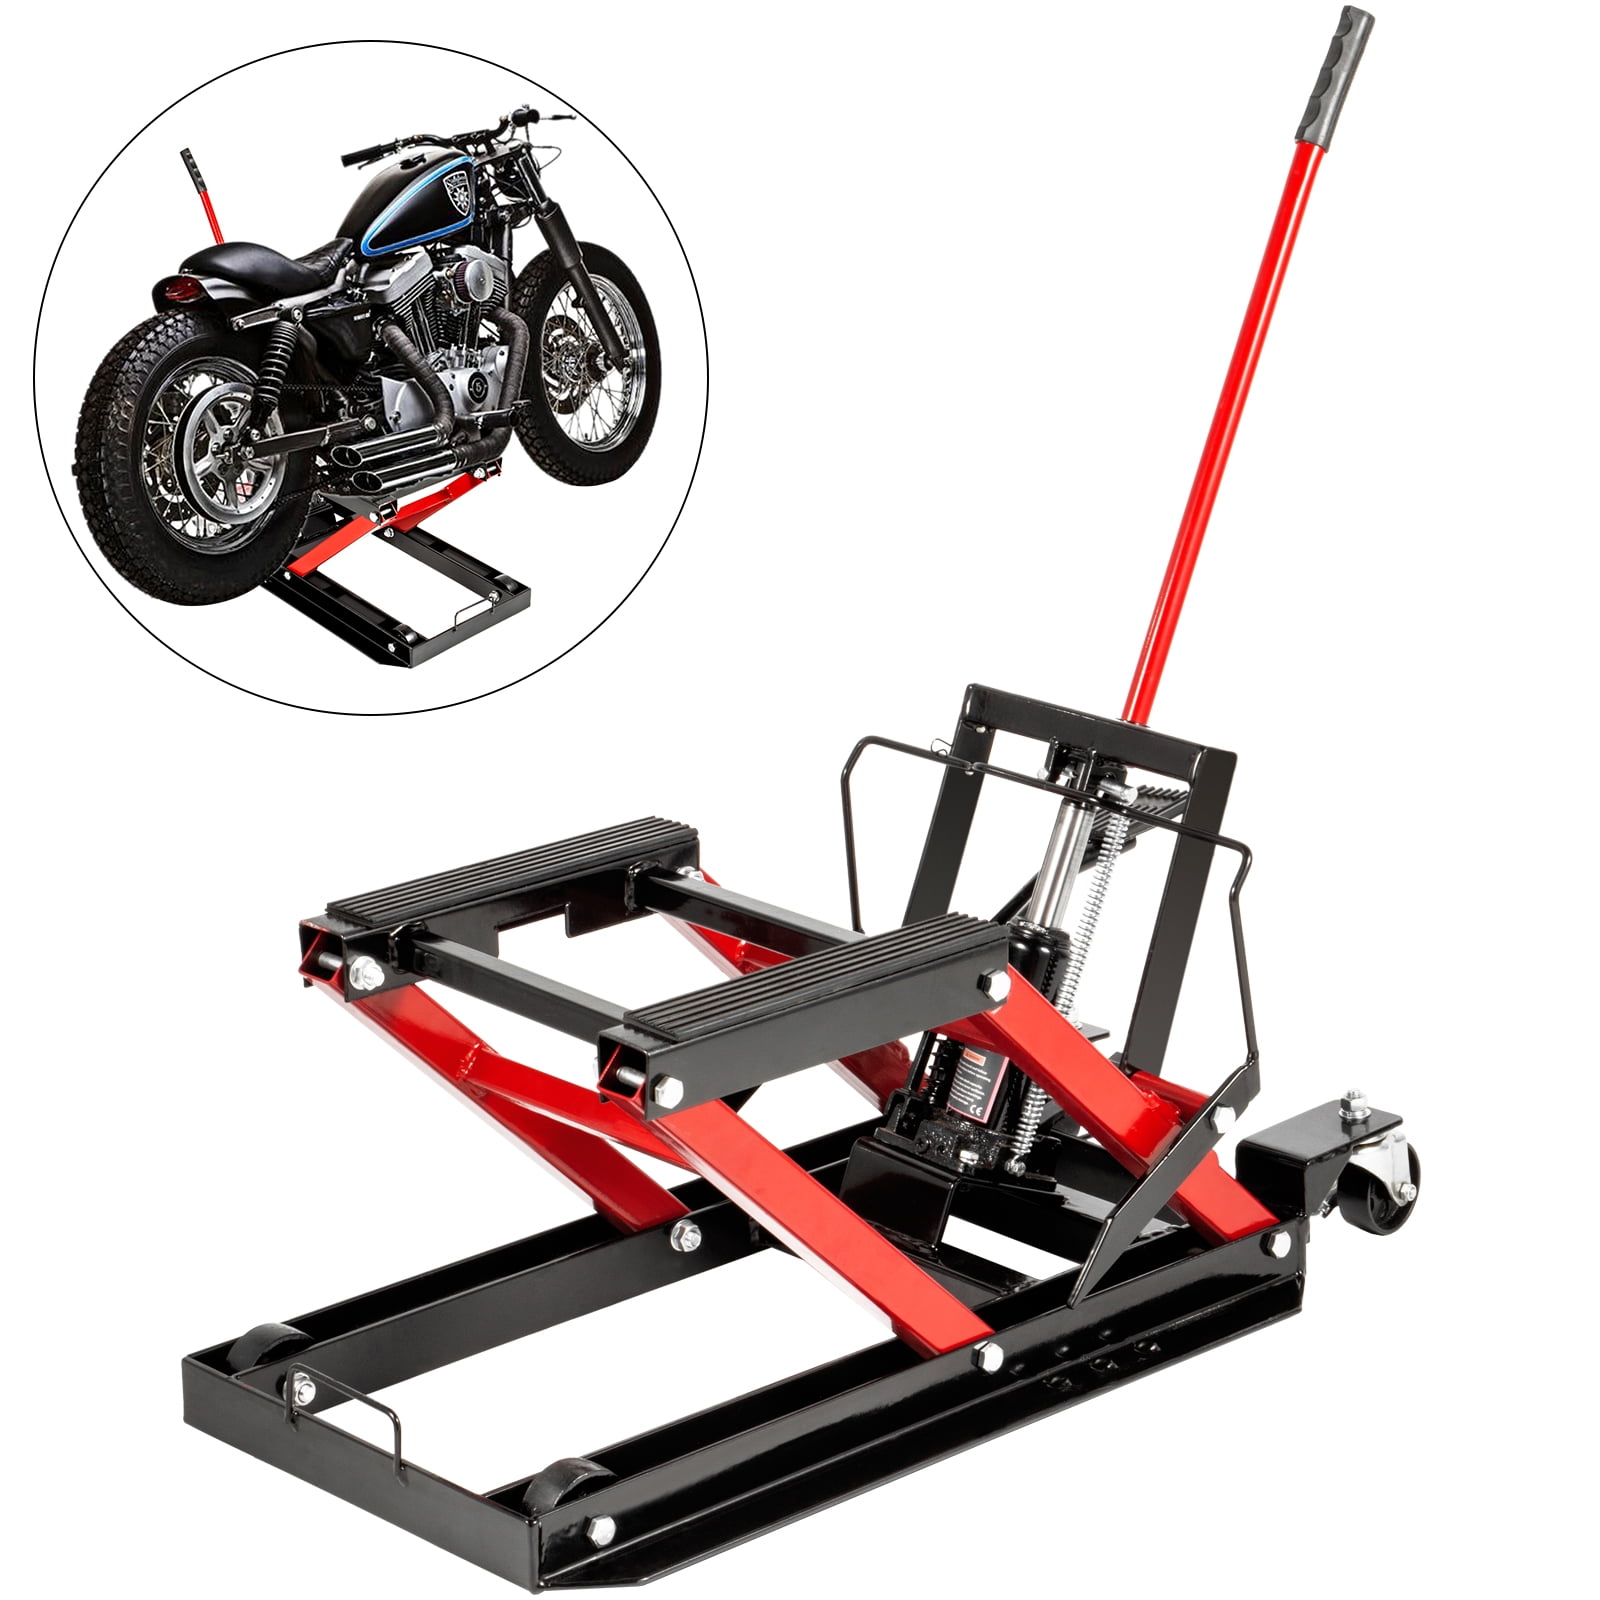 VEVOR Motorcycle Jack Hydraulic Motorcycle Scissor Jack with 1, 700lbs Load Capacity Portable